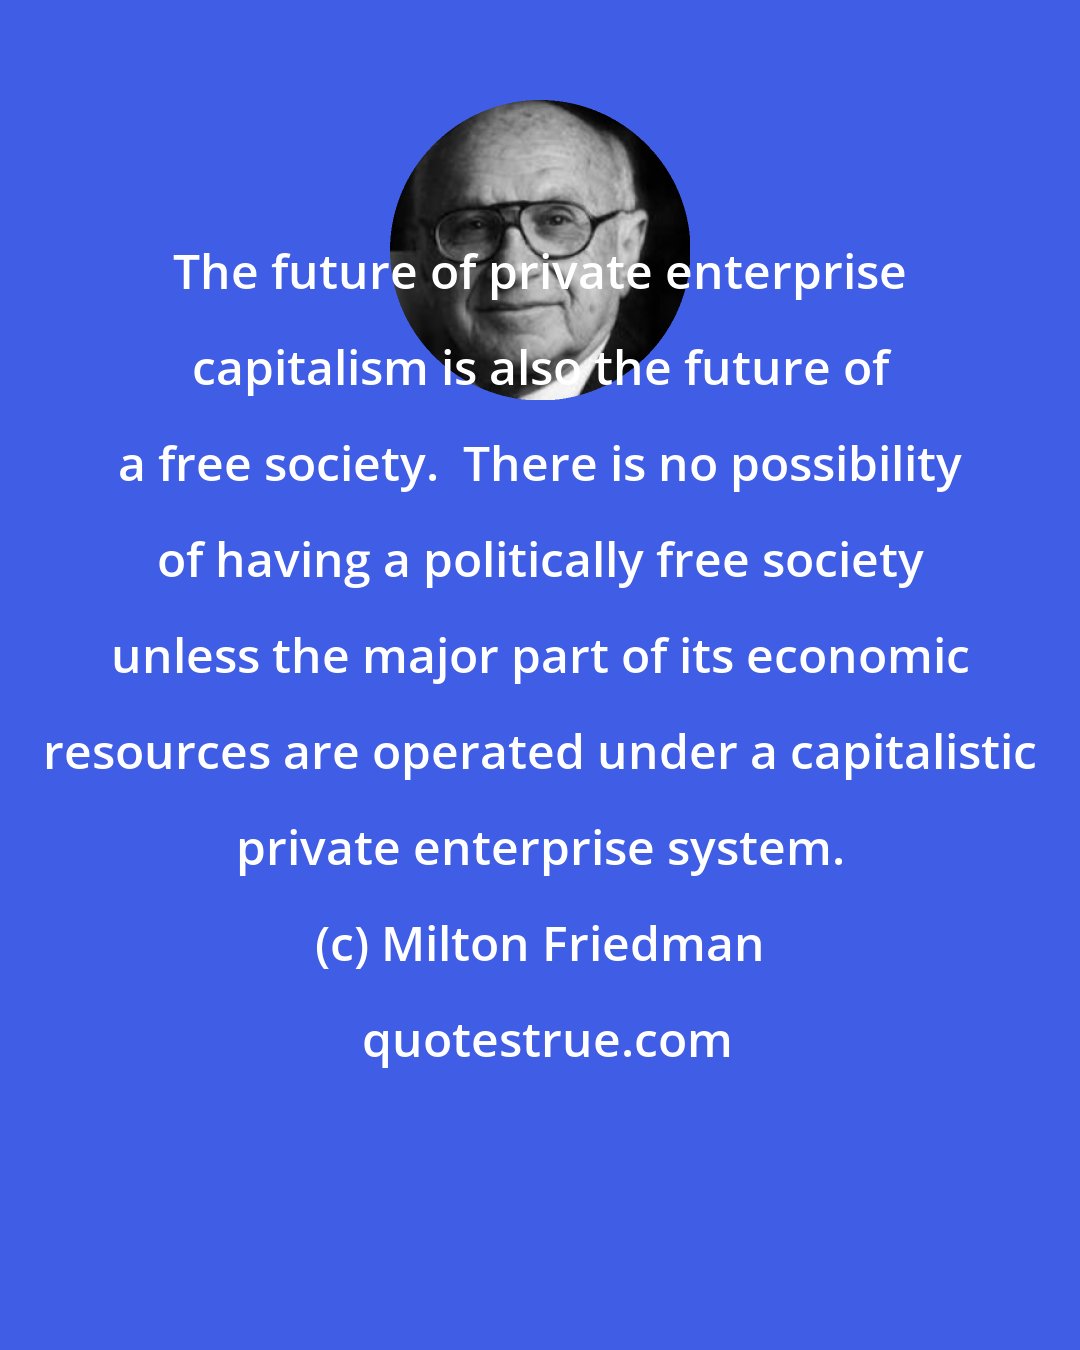 Milton Friedman: The future of private enterprise capitalism is also the future of a free society.  There is no possibility of having a politically free society unless the major part of its economic resources are operated under a capitalistic private enterprise system.